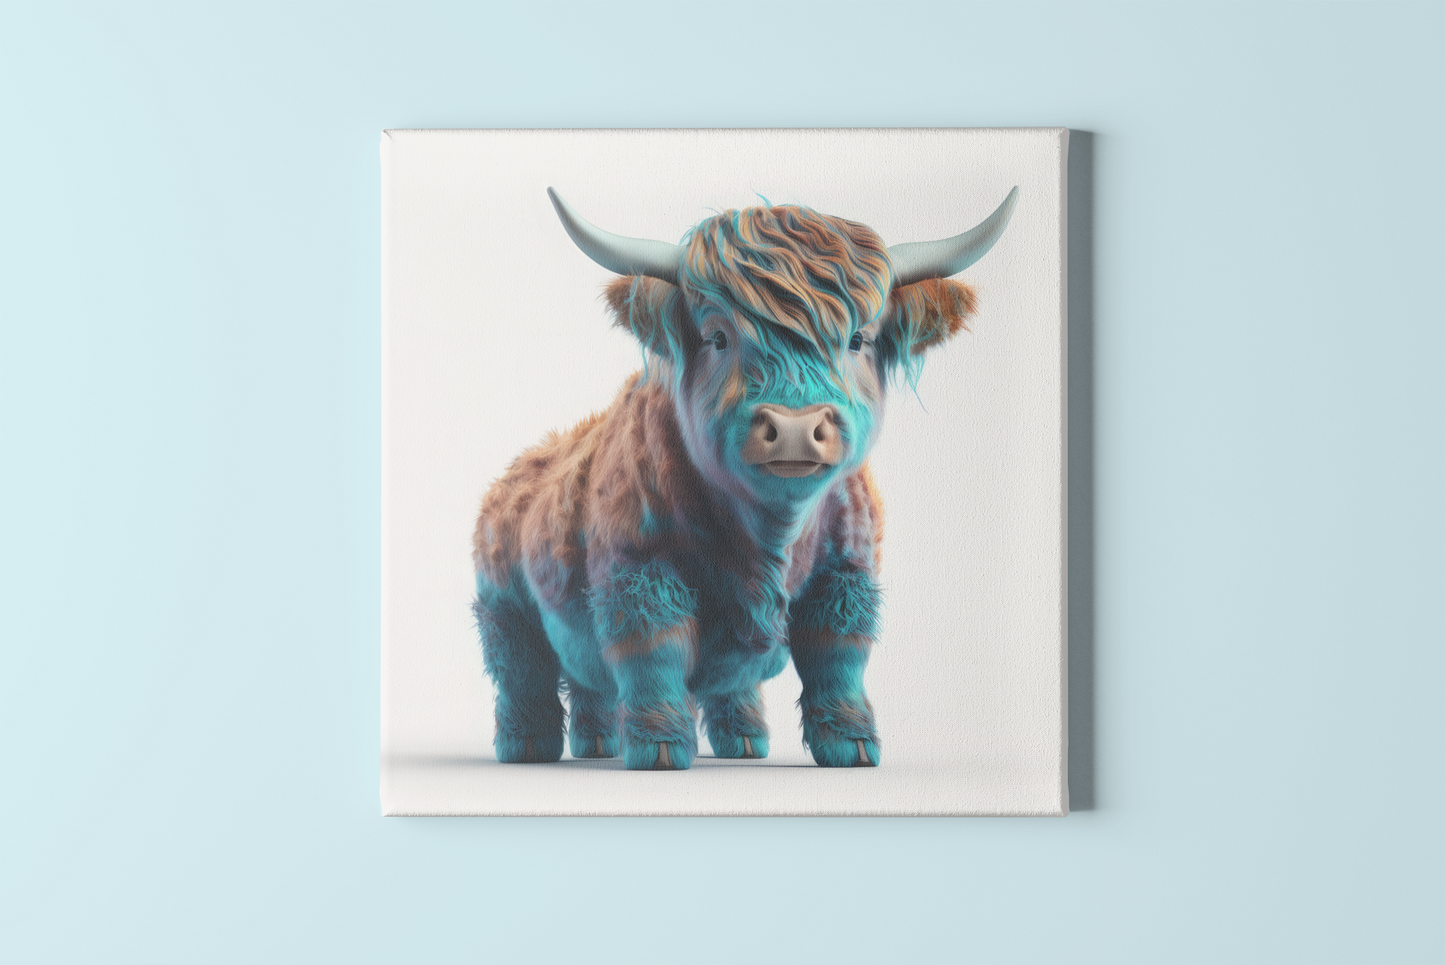 Playful Moos: Meet Scooter - Highland Cow Kids Collection